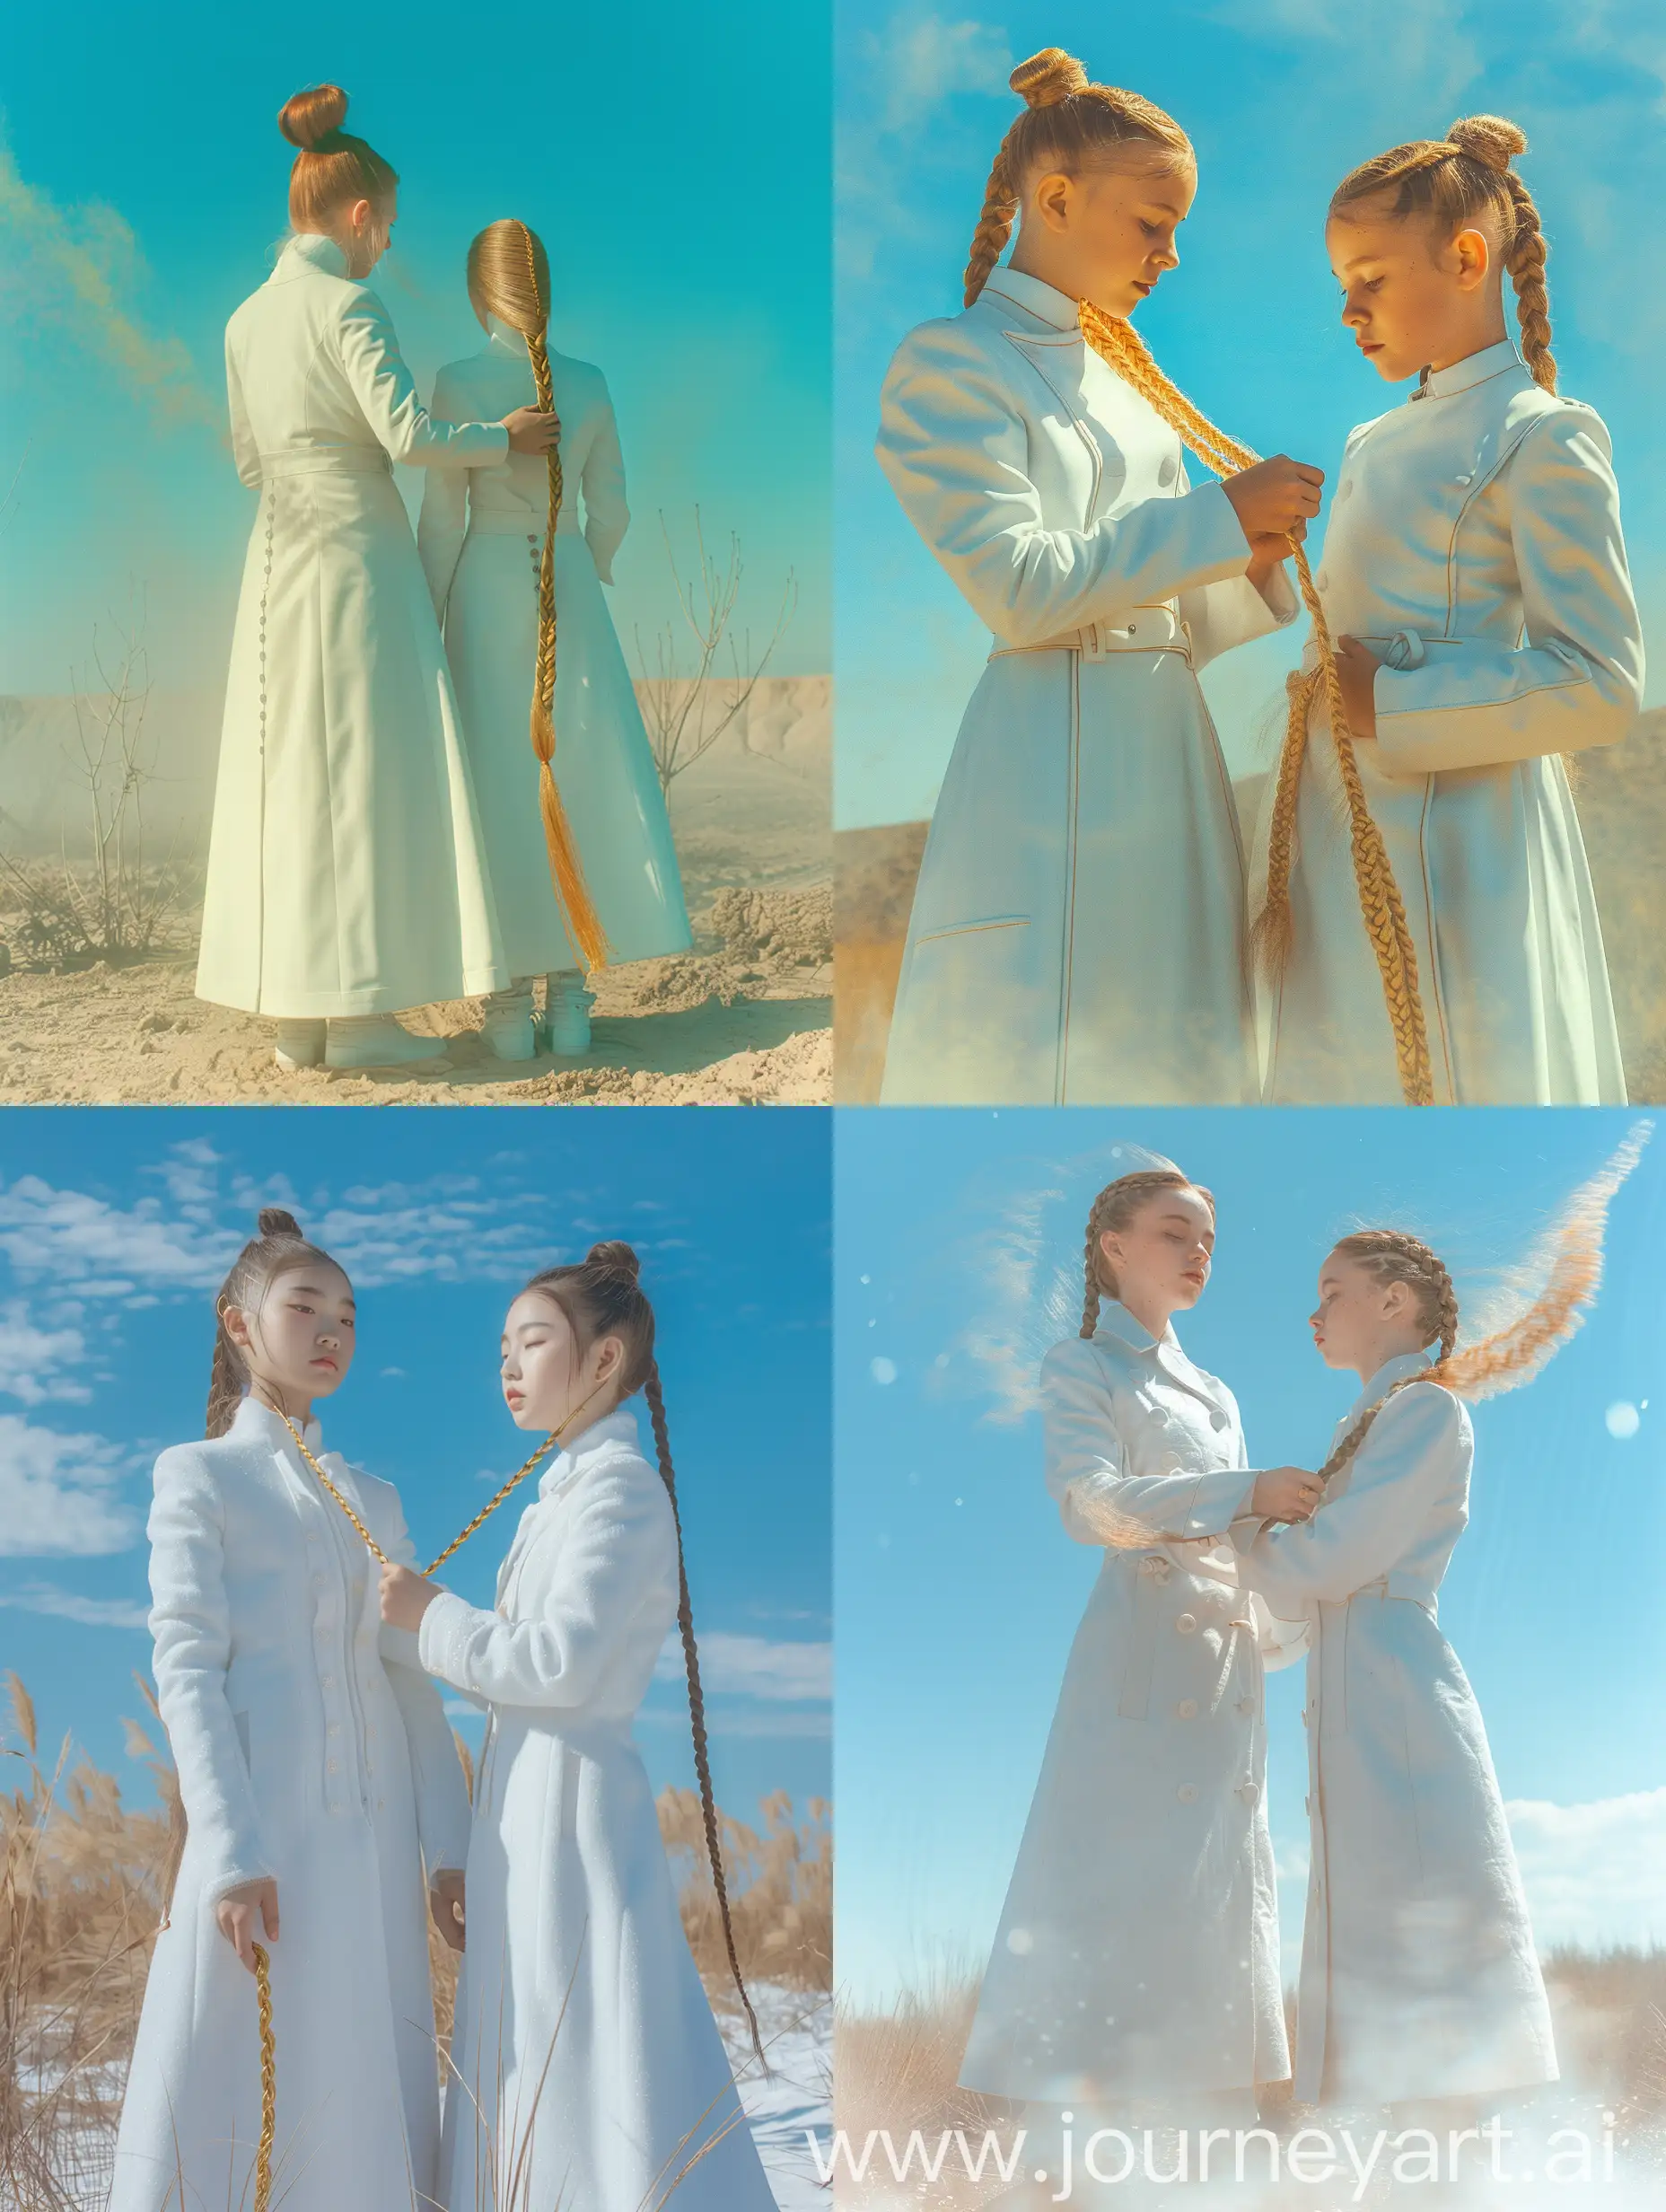 Twin-Sisters-in-White-Coats-Braiding-Golden-Hair-under-Blue-Sky